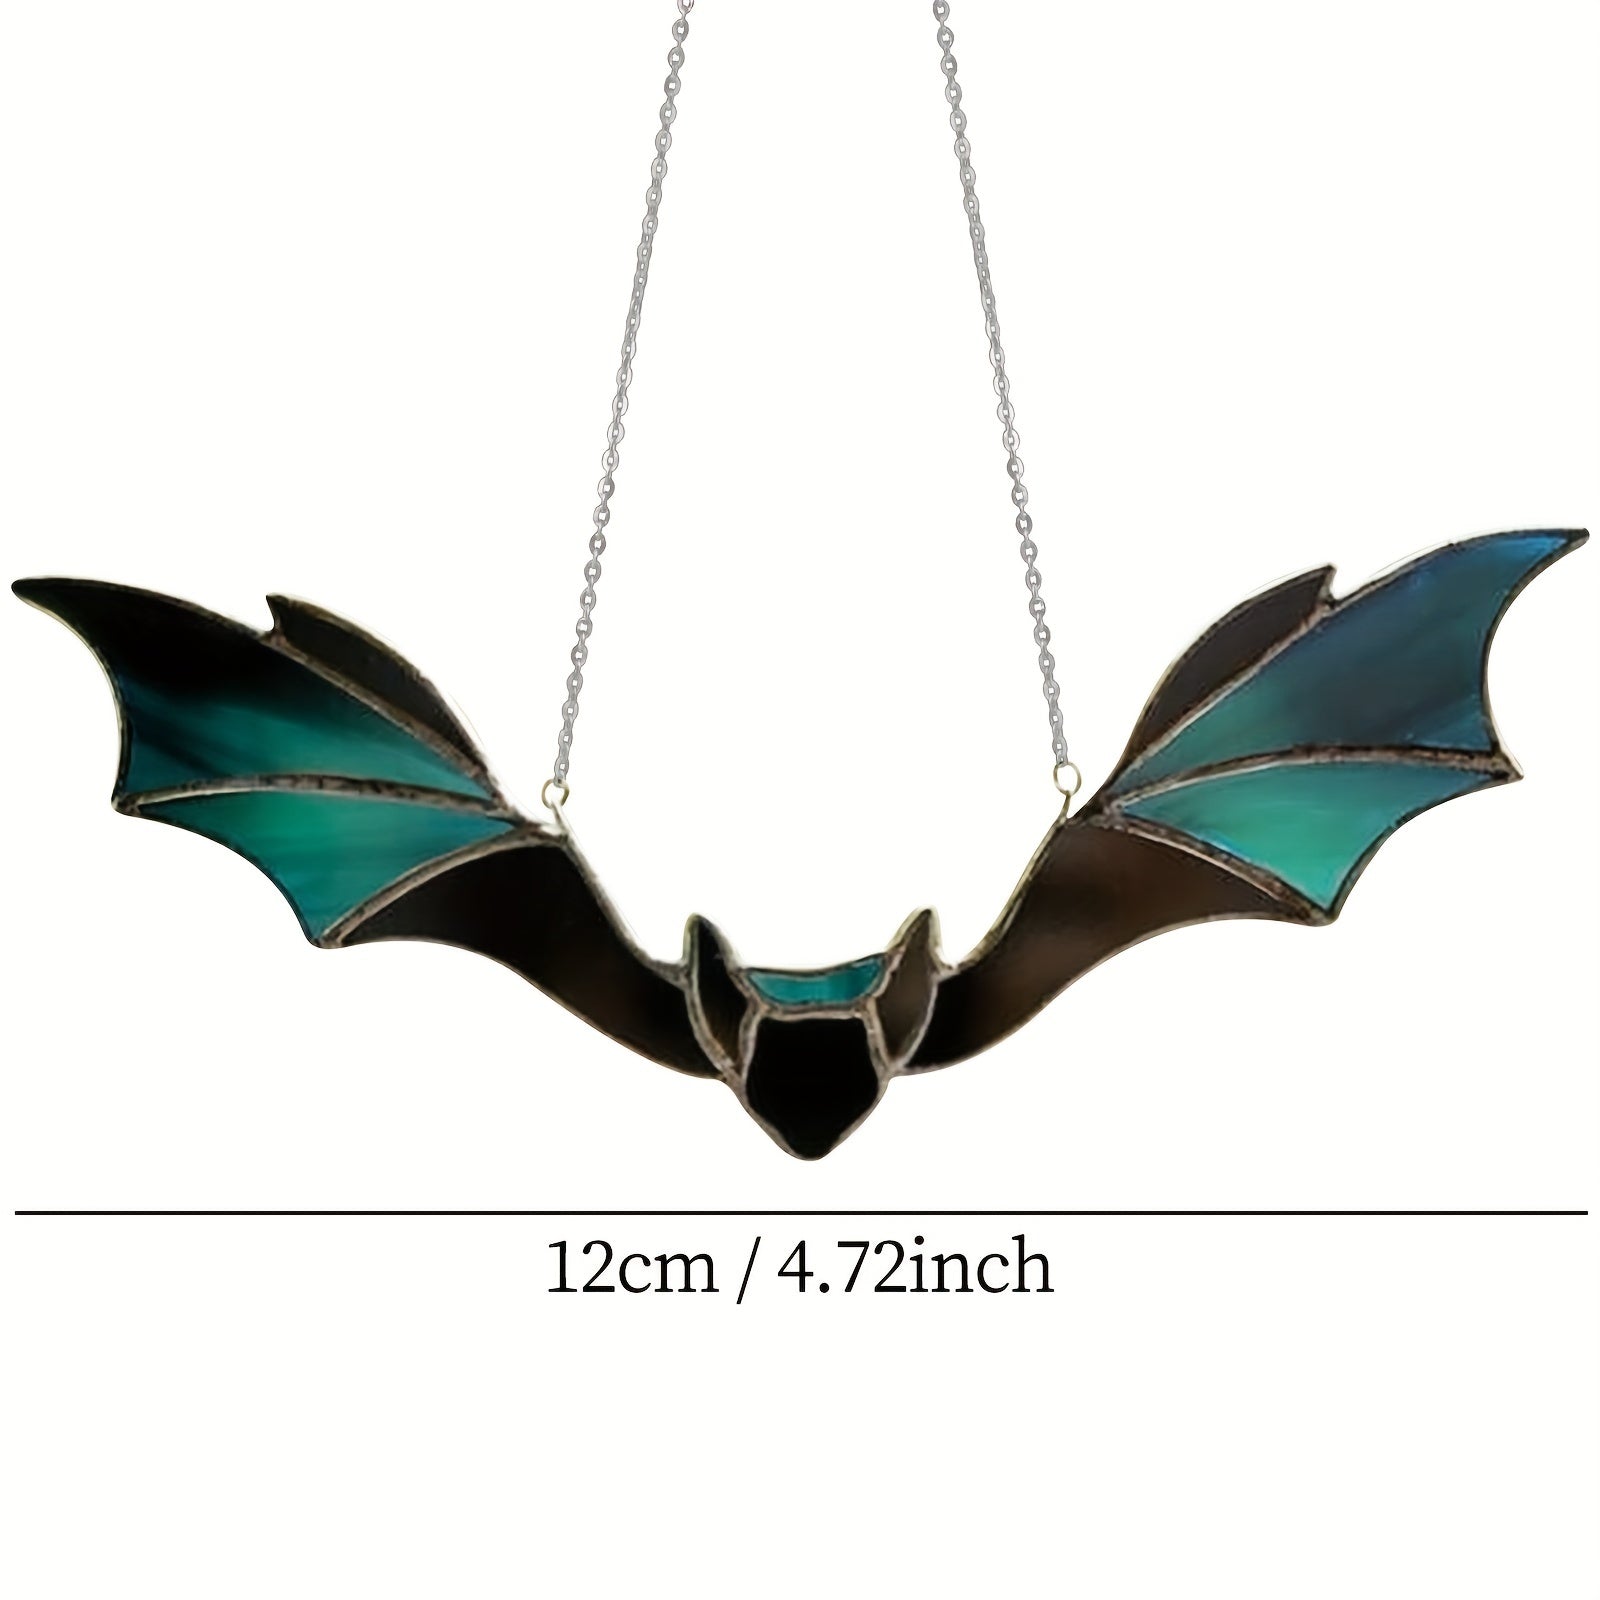 Add a Spooky Touch to Your Home with this Colorful Bat Pendant Decor - Perfect for Halloween, Gothic, Bar, KTV & Party Decor!